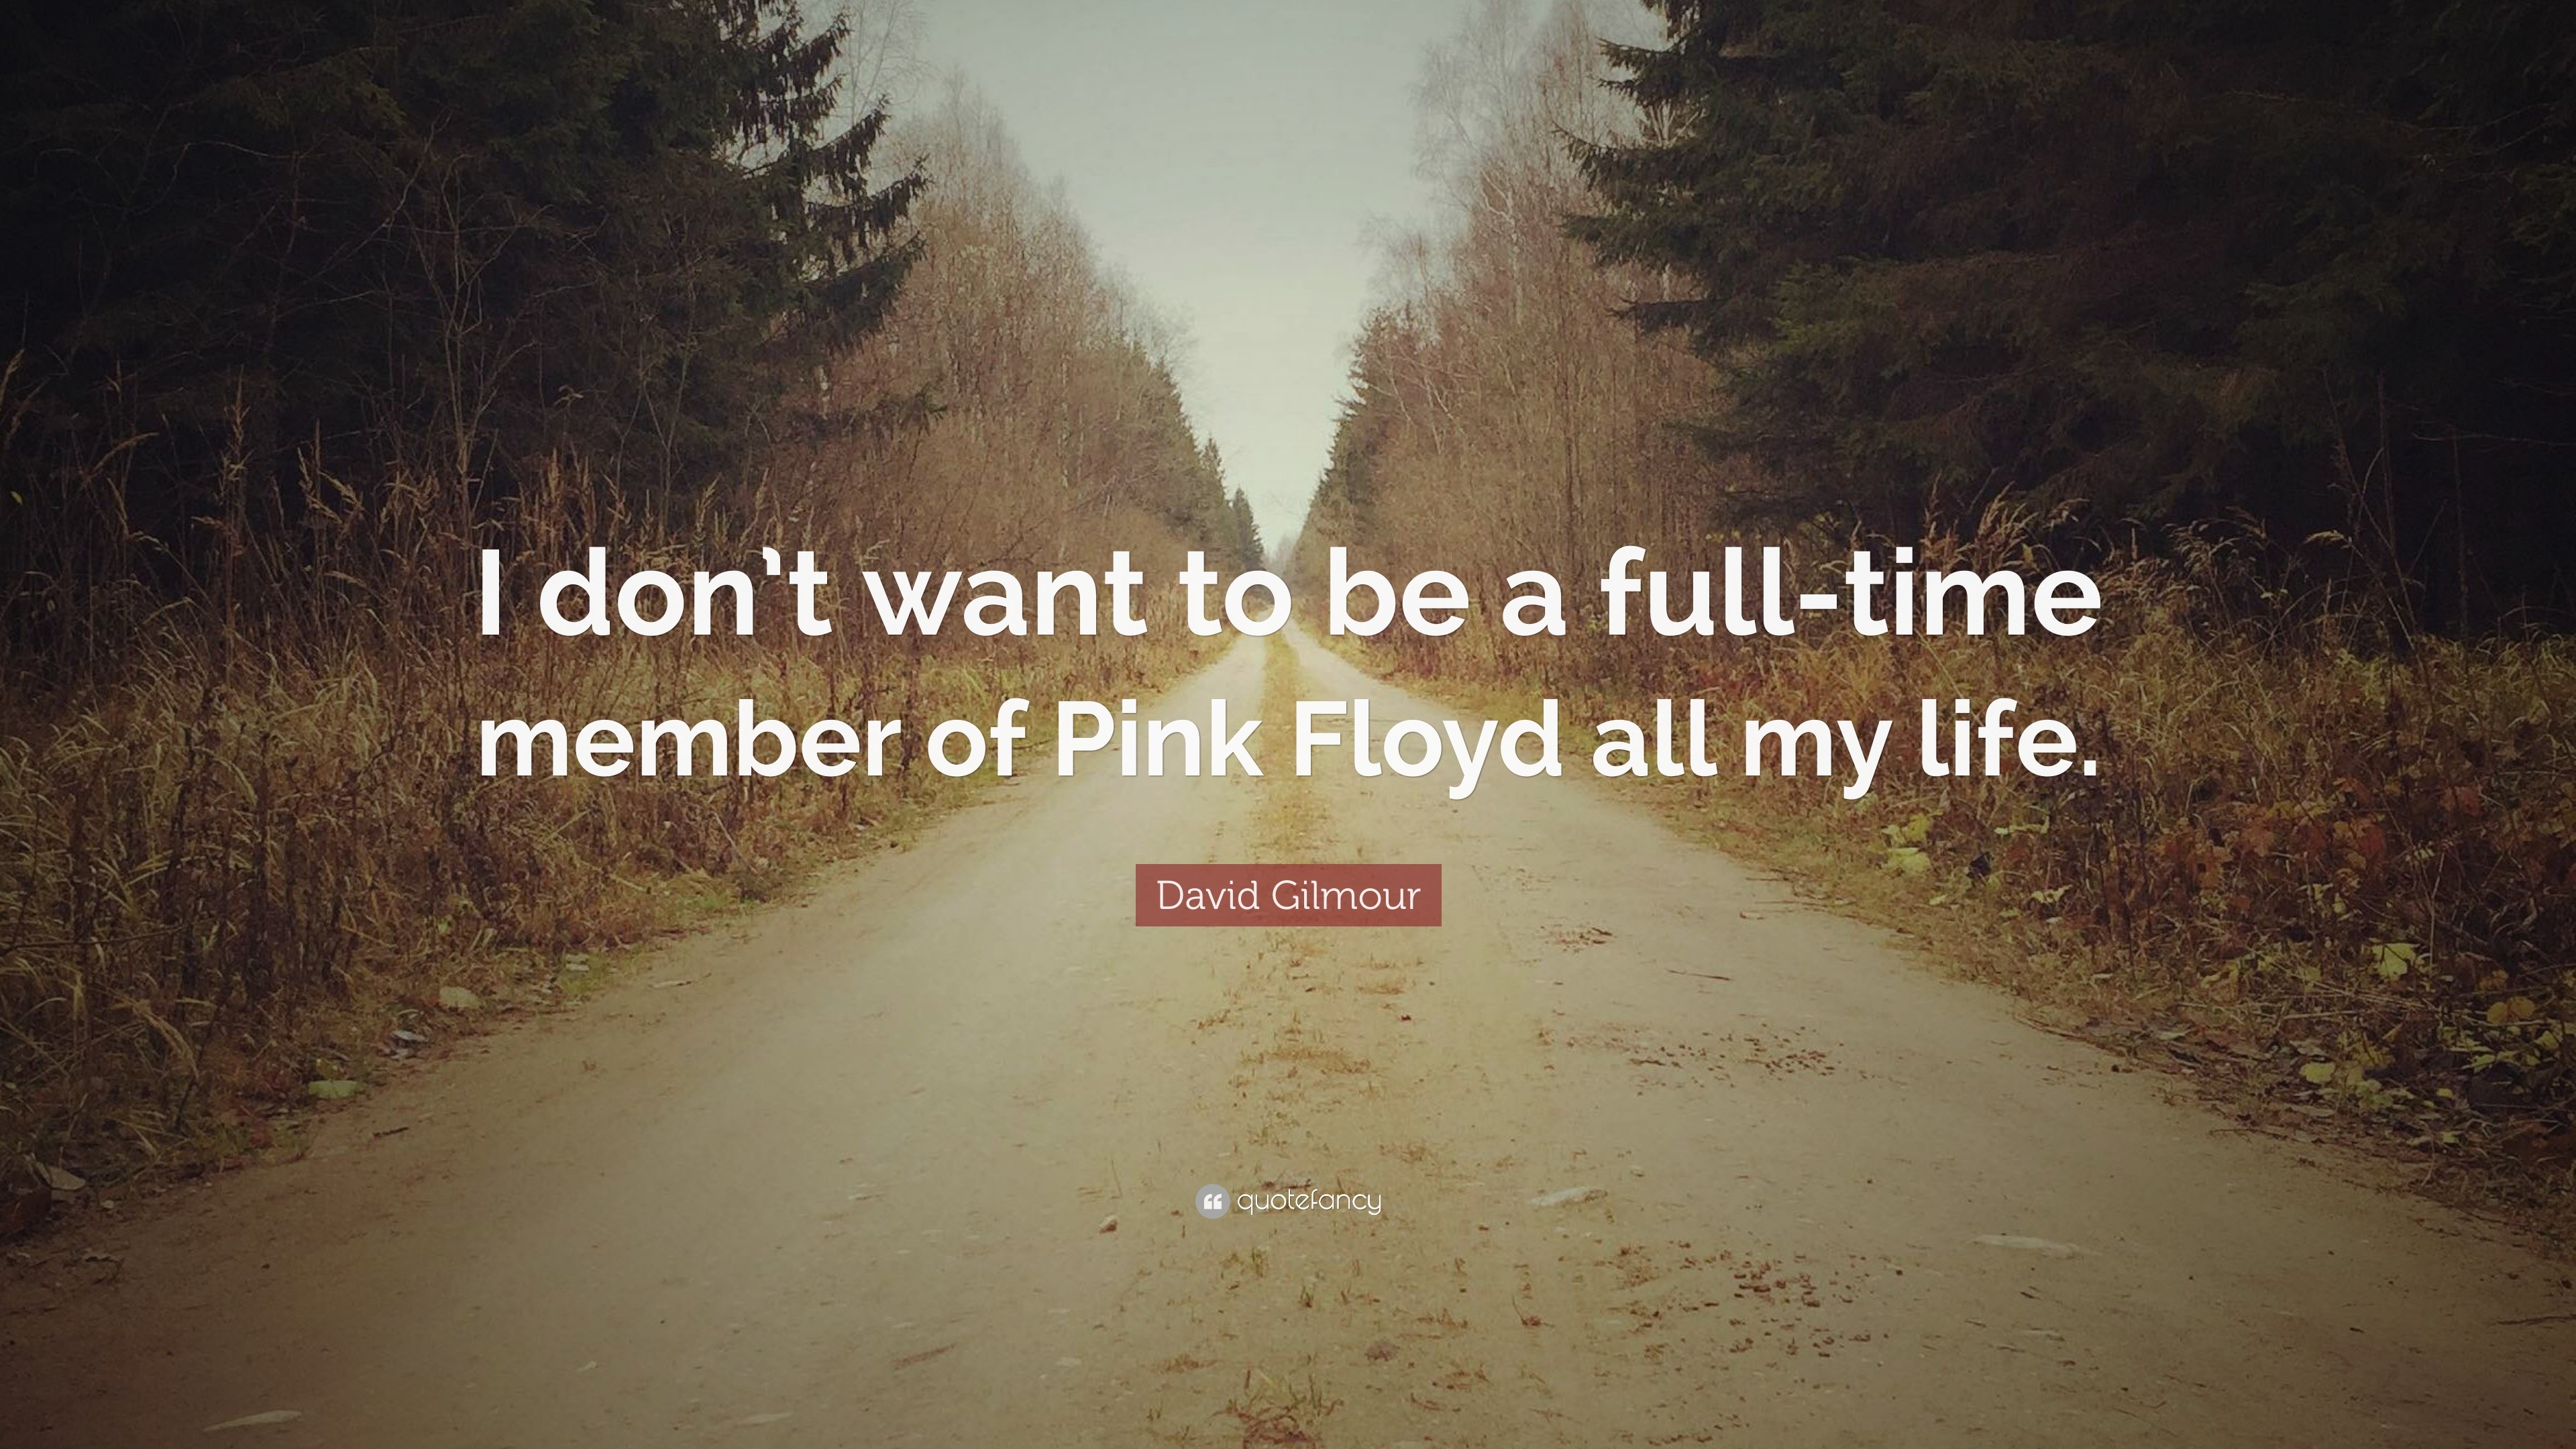 David Gilmour Quotes (47 wallpapers) - Quotefancy